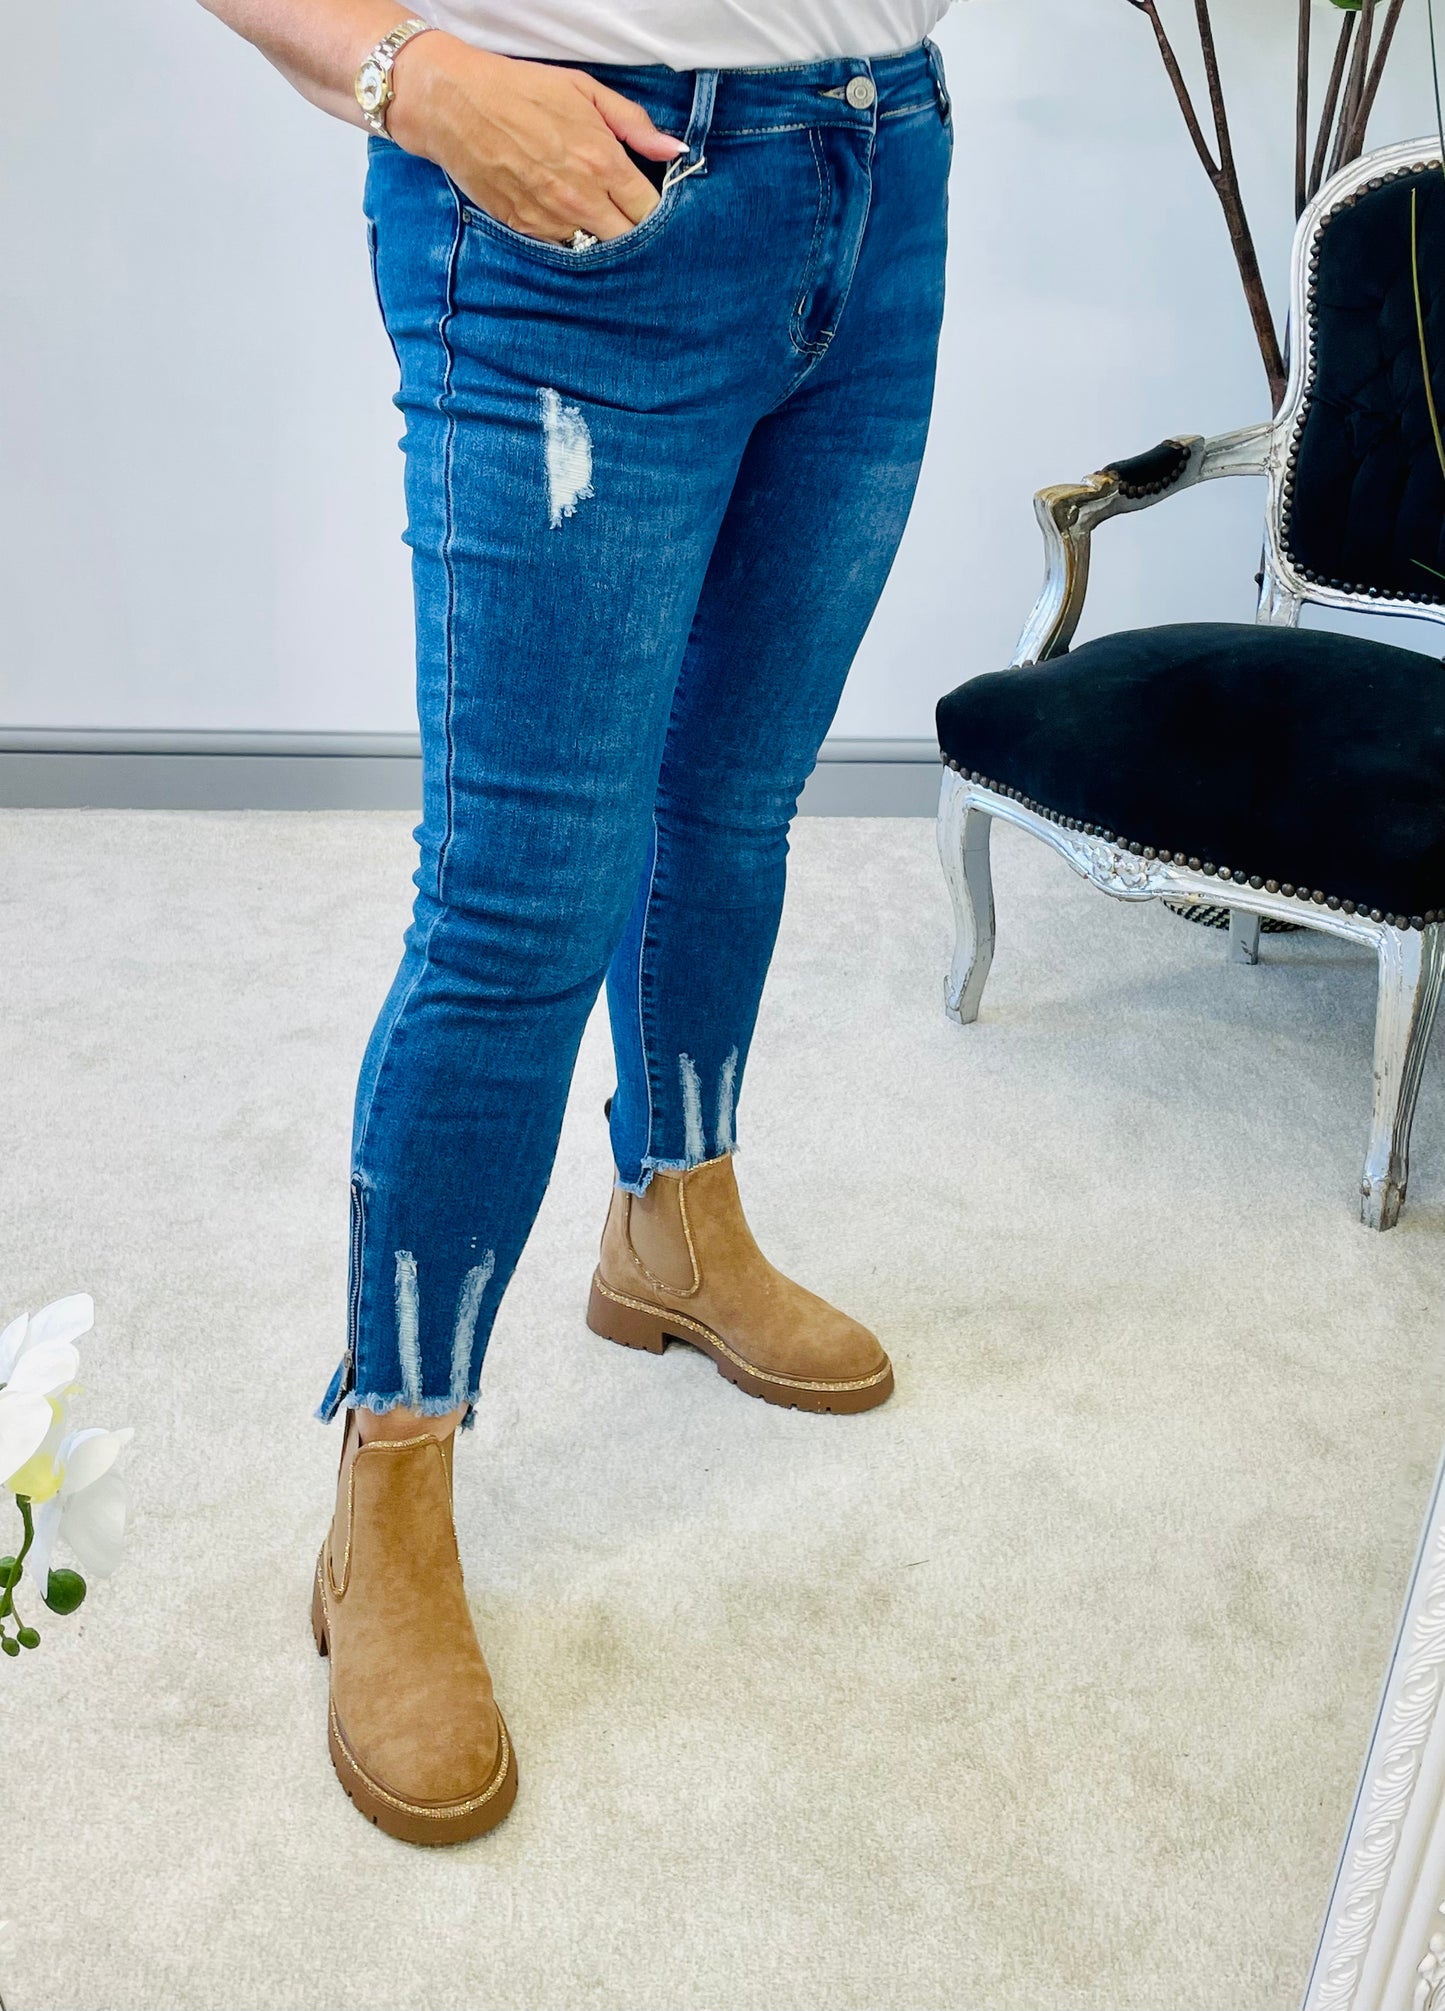 The LINCOLN zip ankle jeans - size 10 to 20